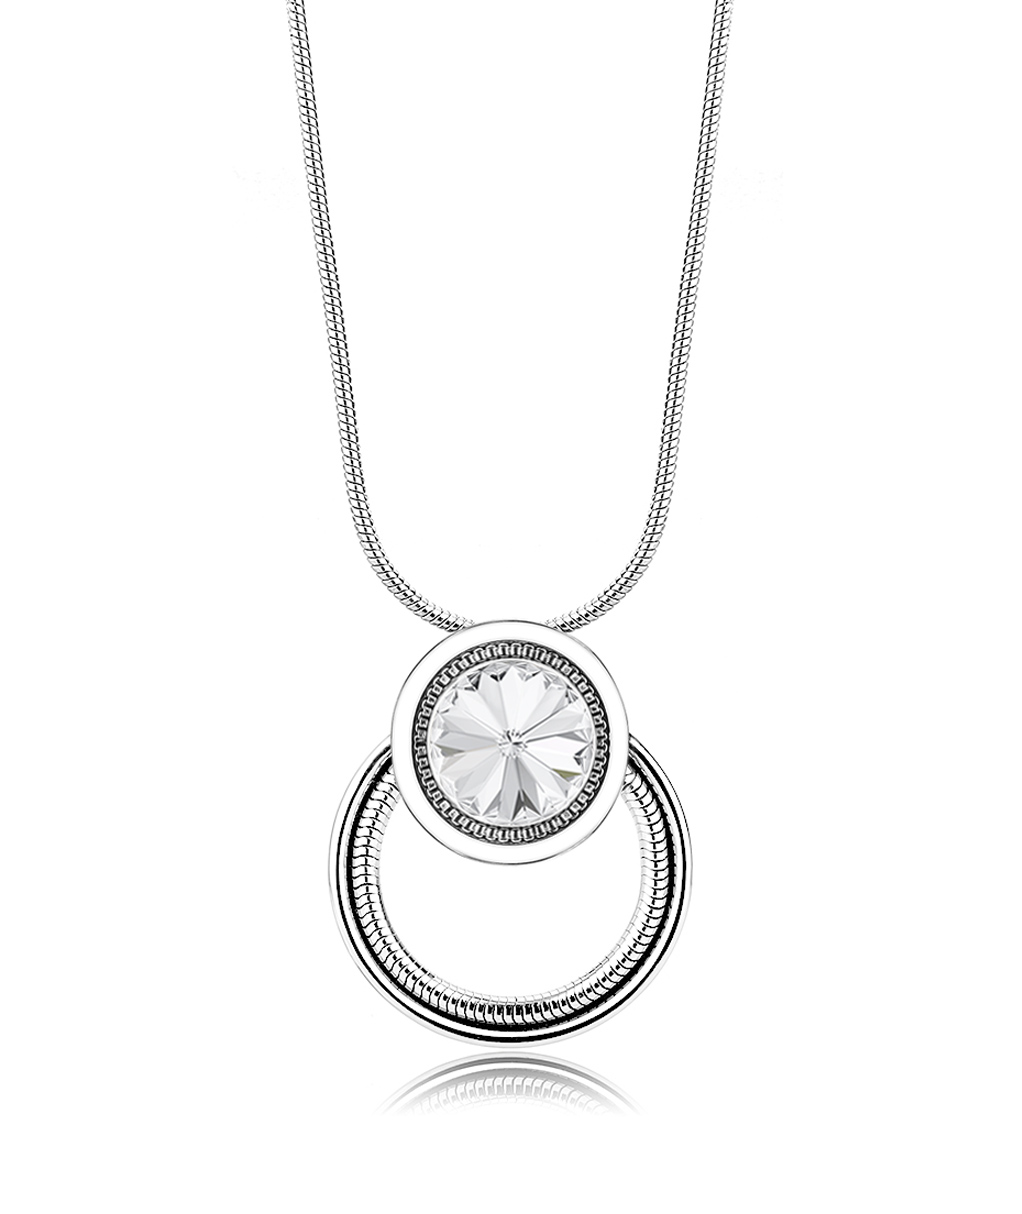 Stainless steel necklace with Swarovski crystal